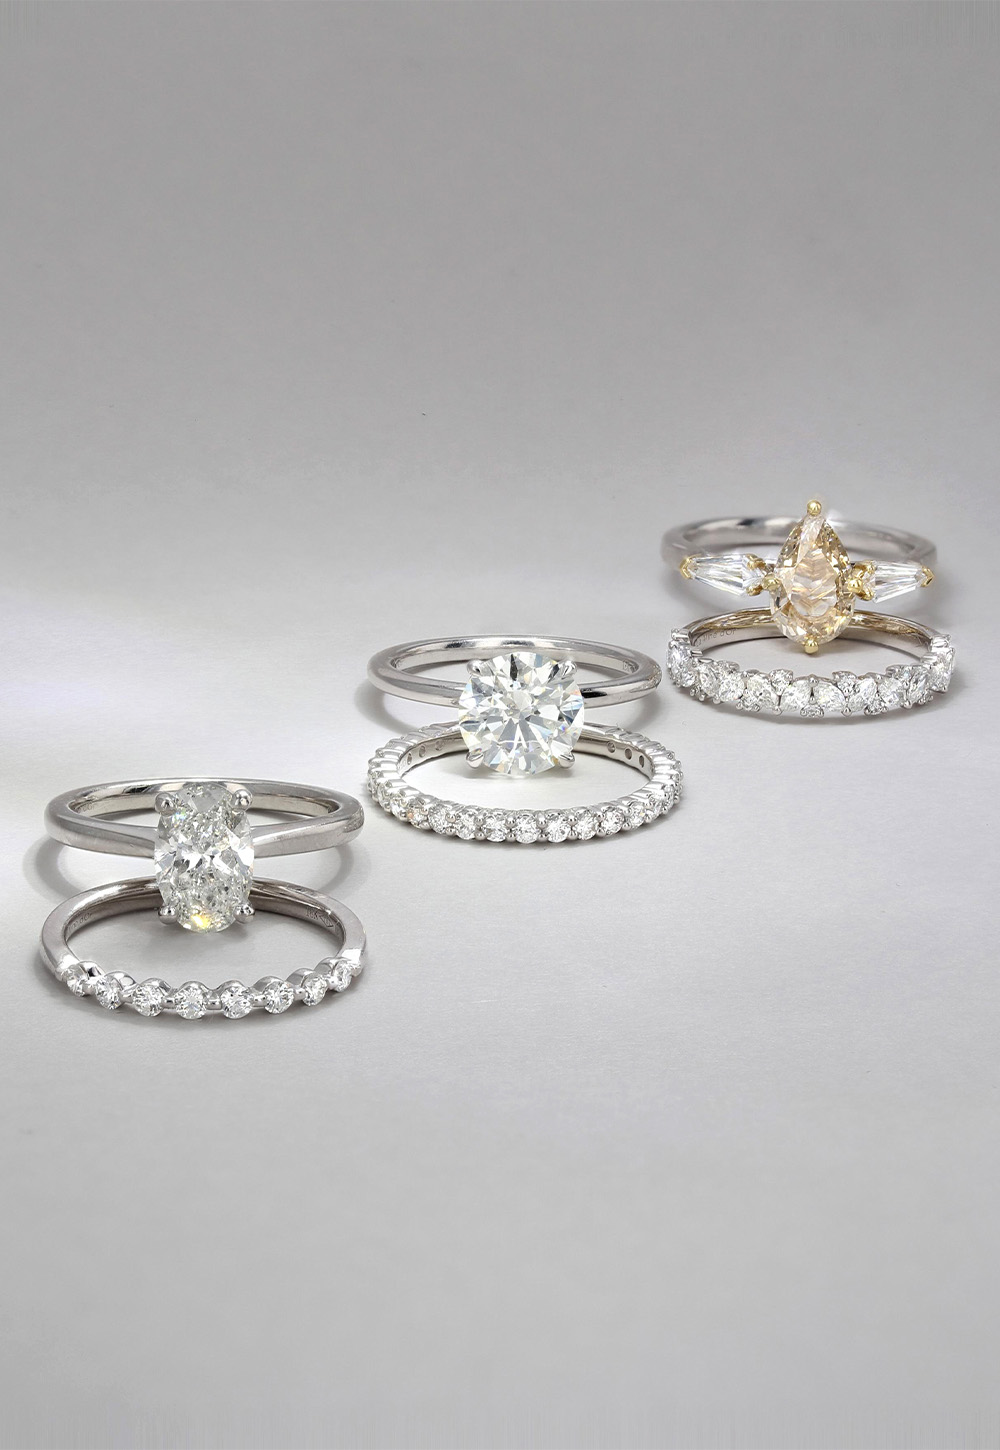 Shop De Beers Forevermark Diamond Engagement Rings at La Mine d'Or Jewellers Moncton, NB and Halifax, NS